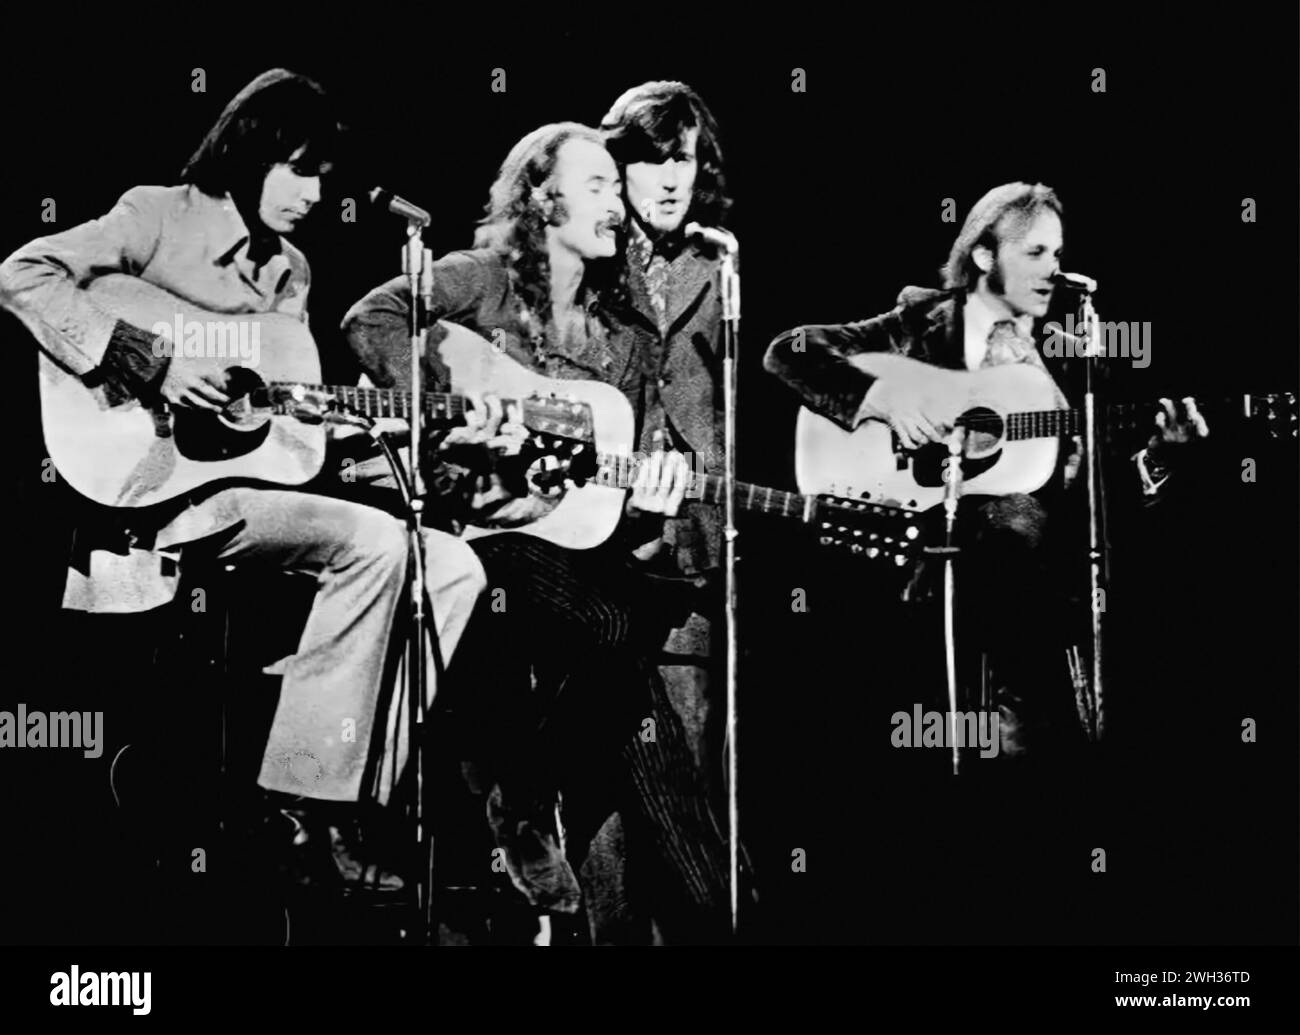 Crosby, Stills, Nash and Young. Photograph of the American rock band in 1970. From left to right: Neil Young, David Crosby, Graham Nash and Stephen Stills Stock Photo